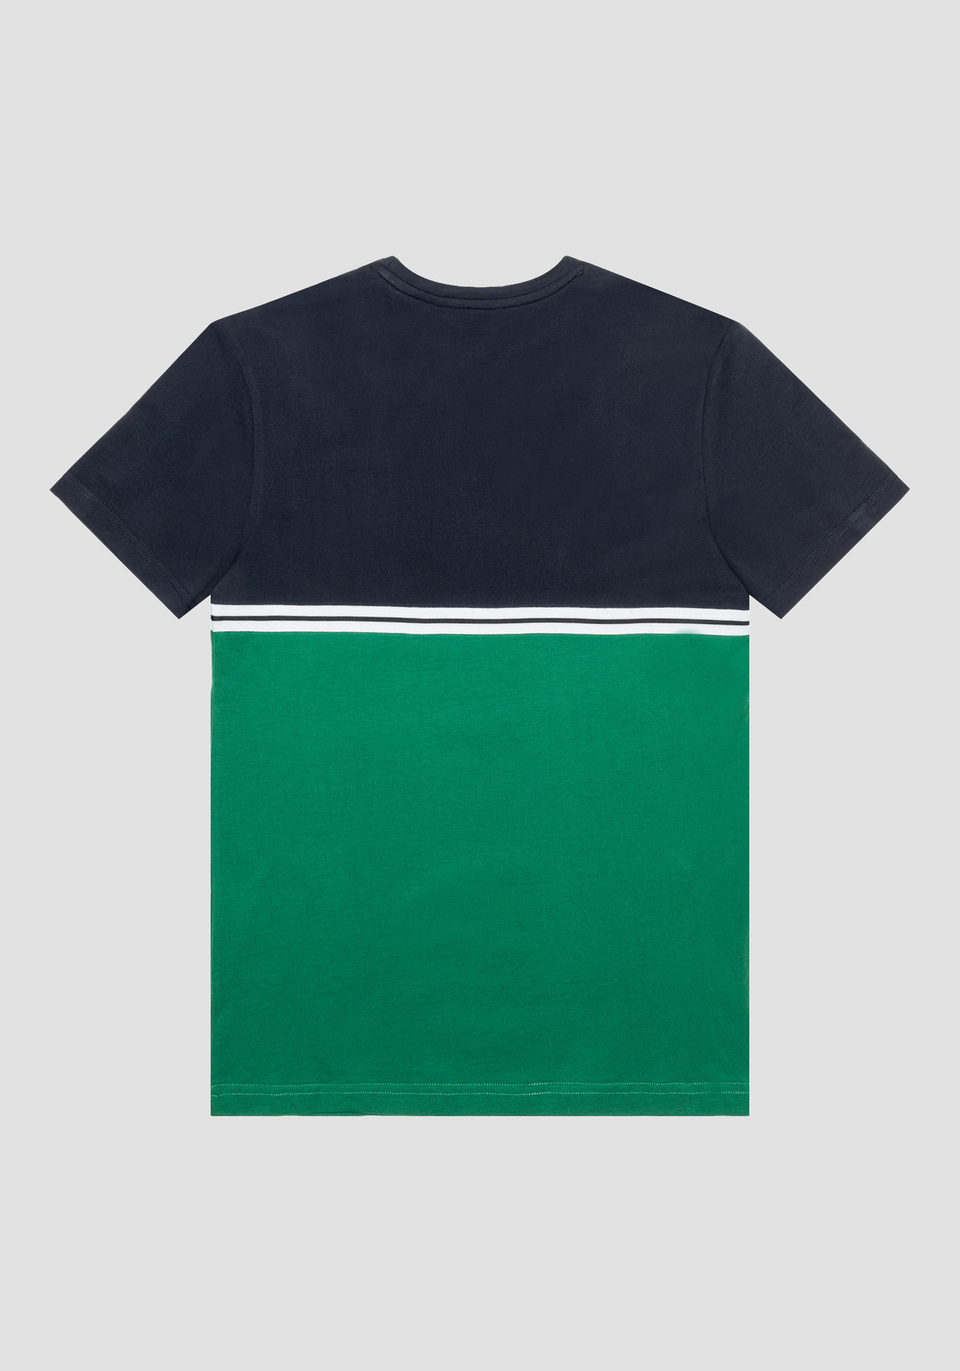 SLIM FIT T-SHIRT IN PURE COTTON WITH FRONT PRINT - Antony Morato Online Shop